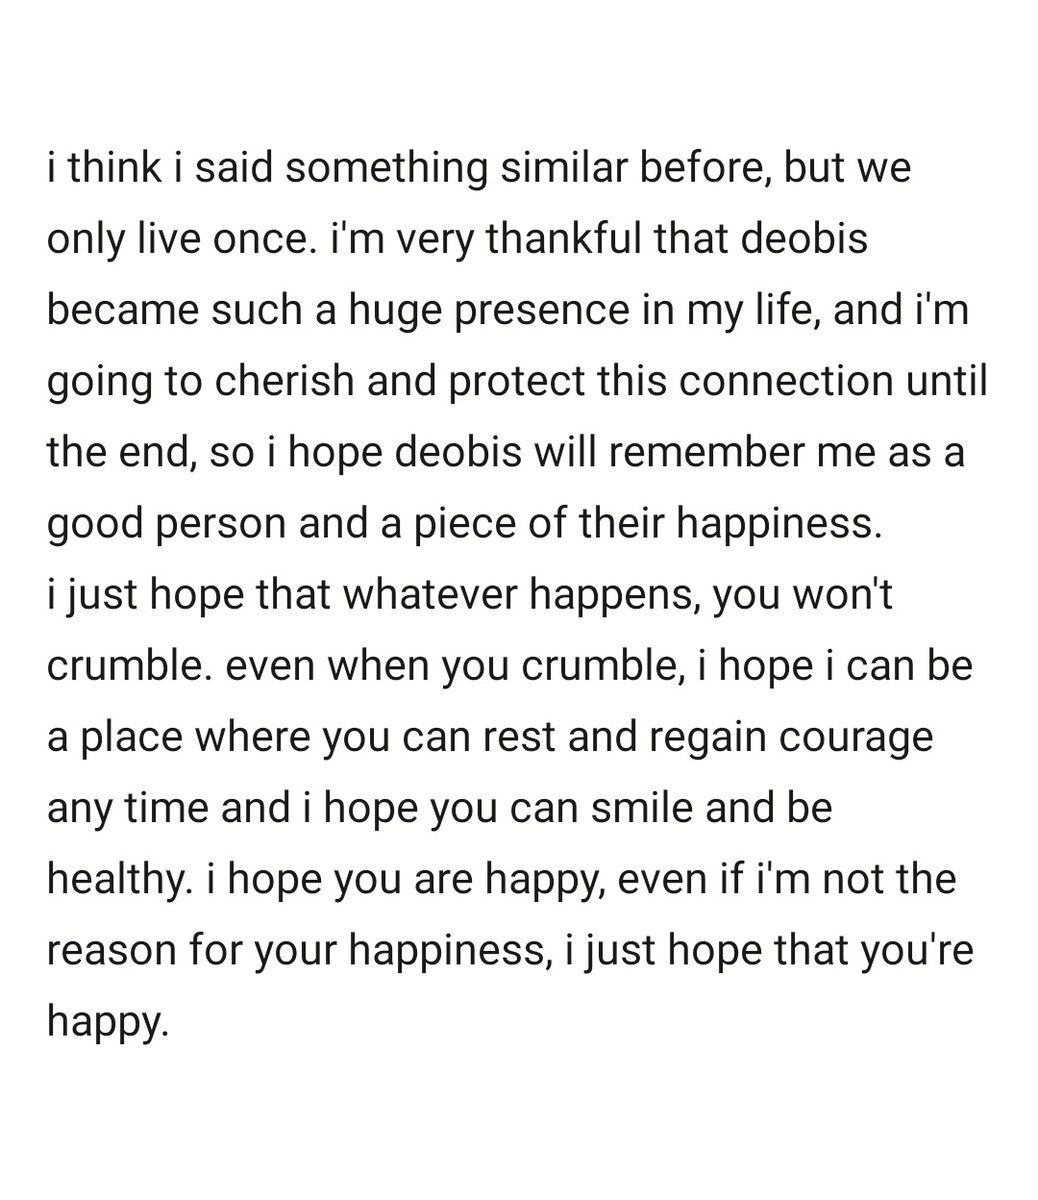 fancafe | 210131"even when you crumble, i hope i can be a place where you can rest and regain courage any time"